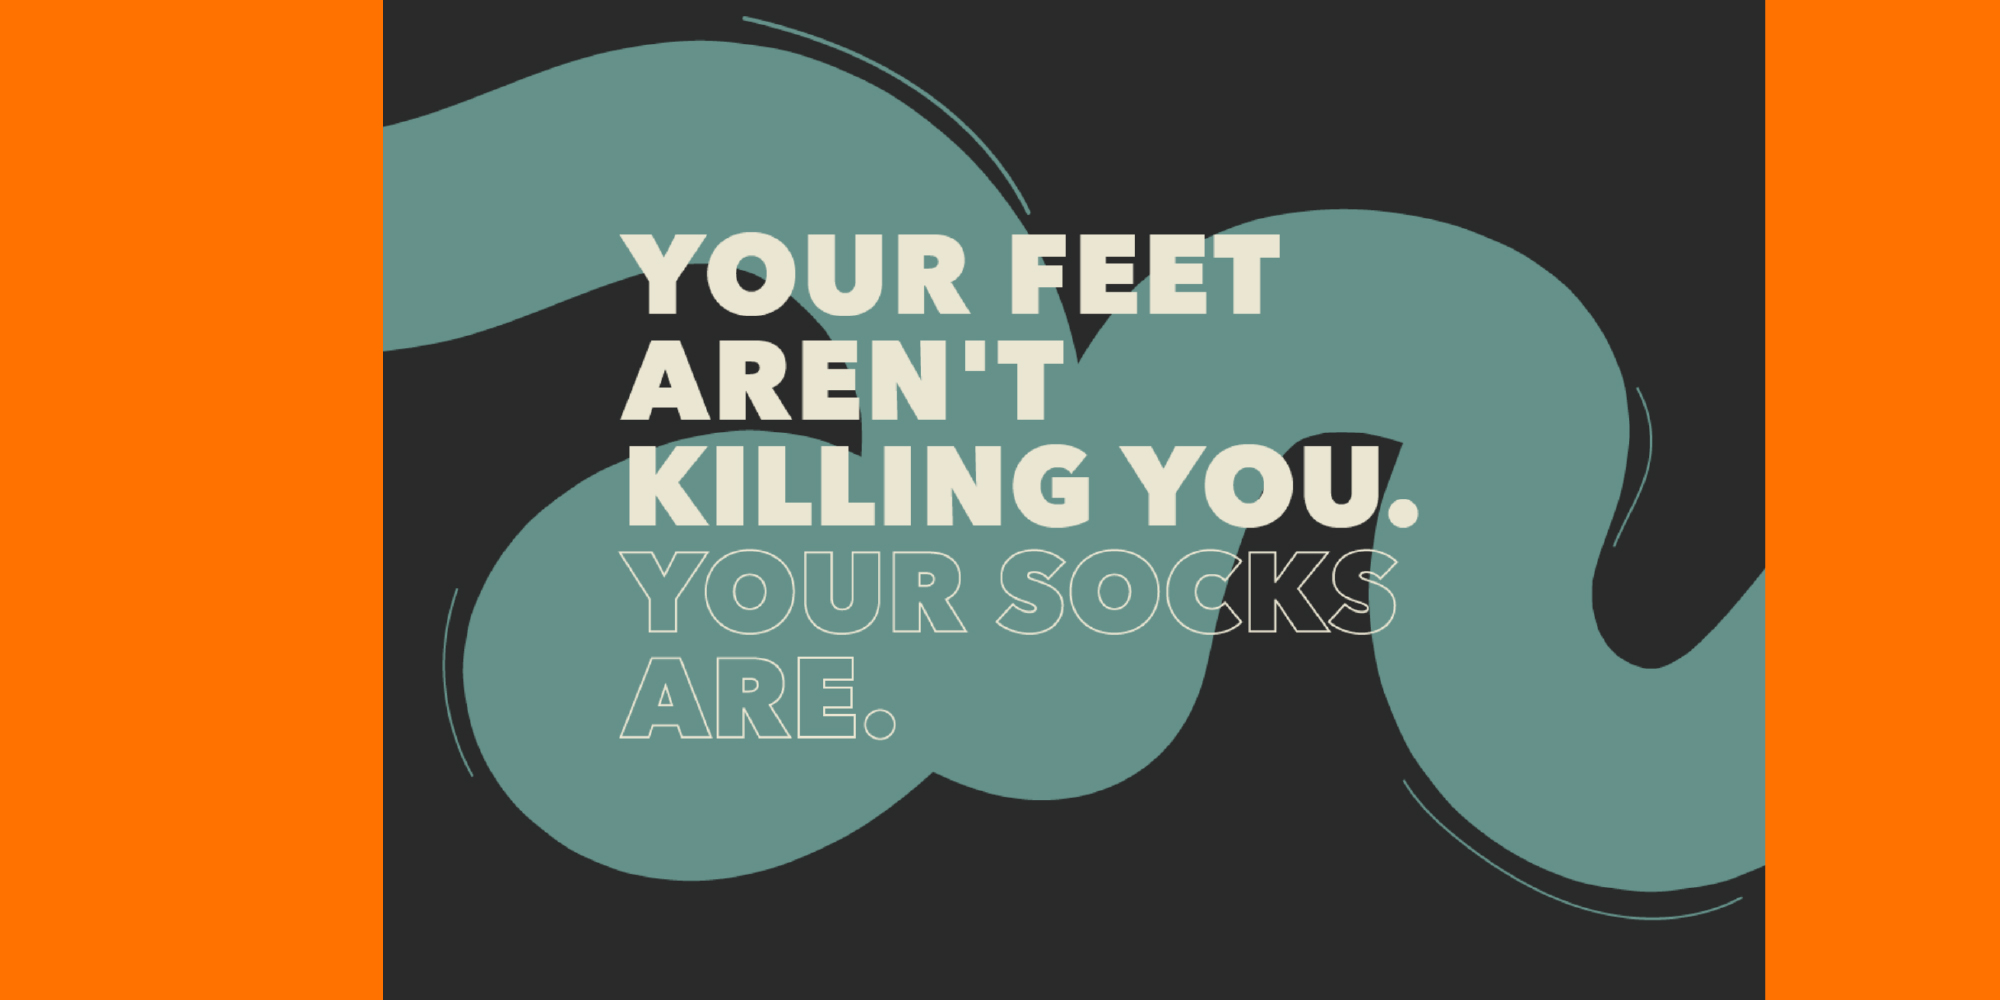 "Foot Traffic" co-created by Fashion students for Digital Illustration and Product Development. Foot Traffic is marketed towards the average commuter that is looking for functional, durable, and comfortable socks.  Image read, Your Feet Aren't Killing You. Your Socks Are